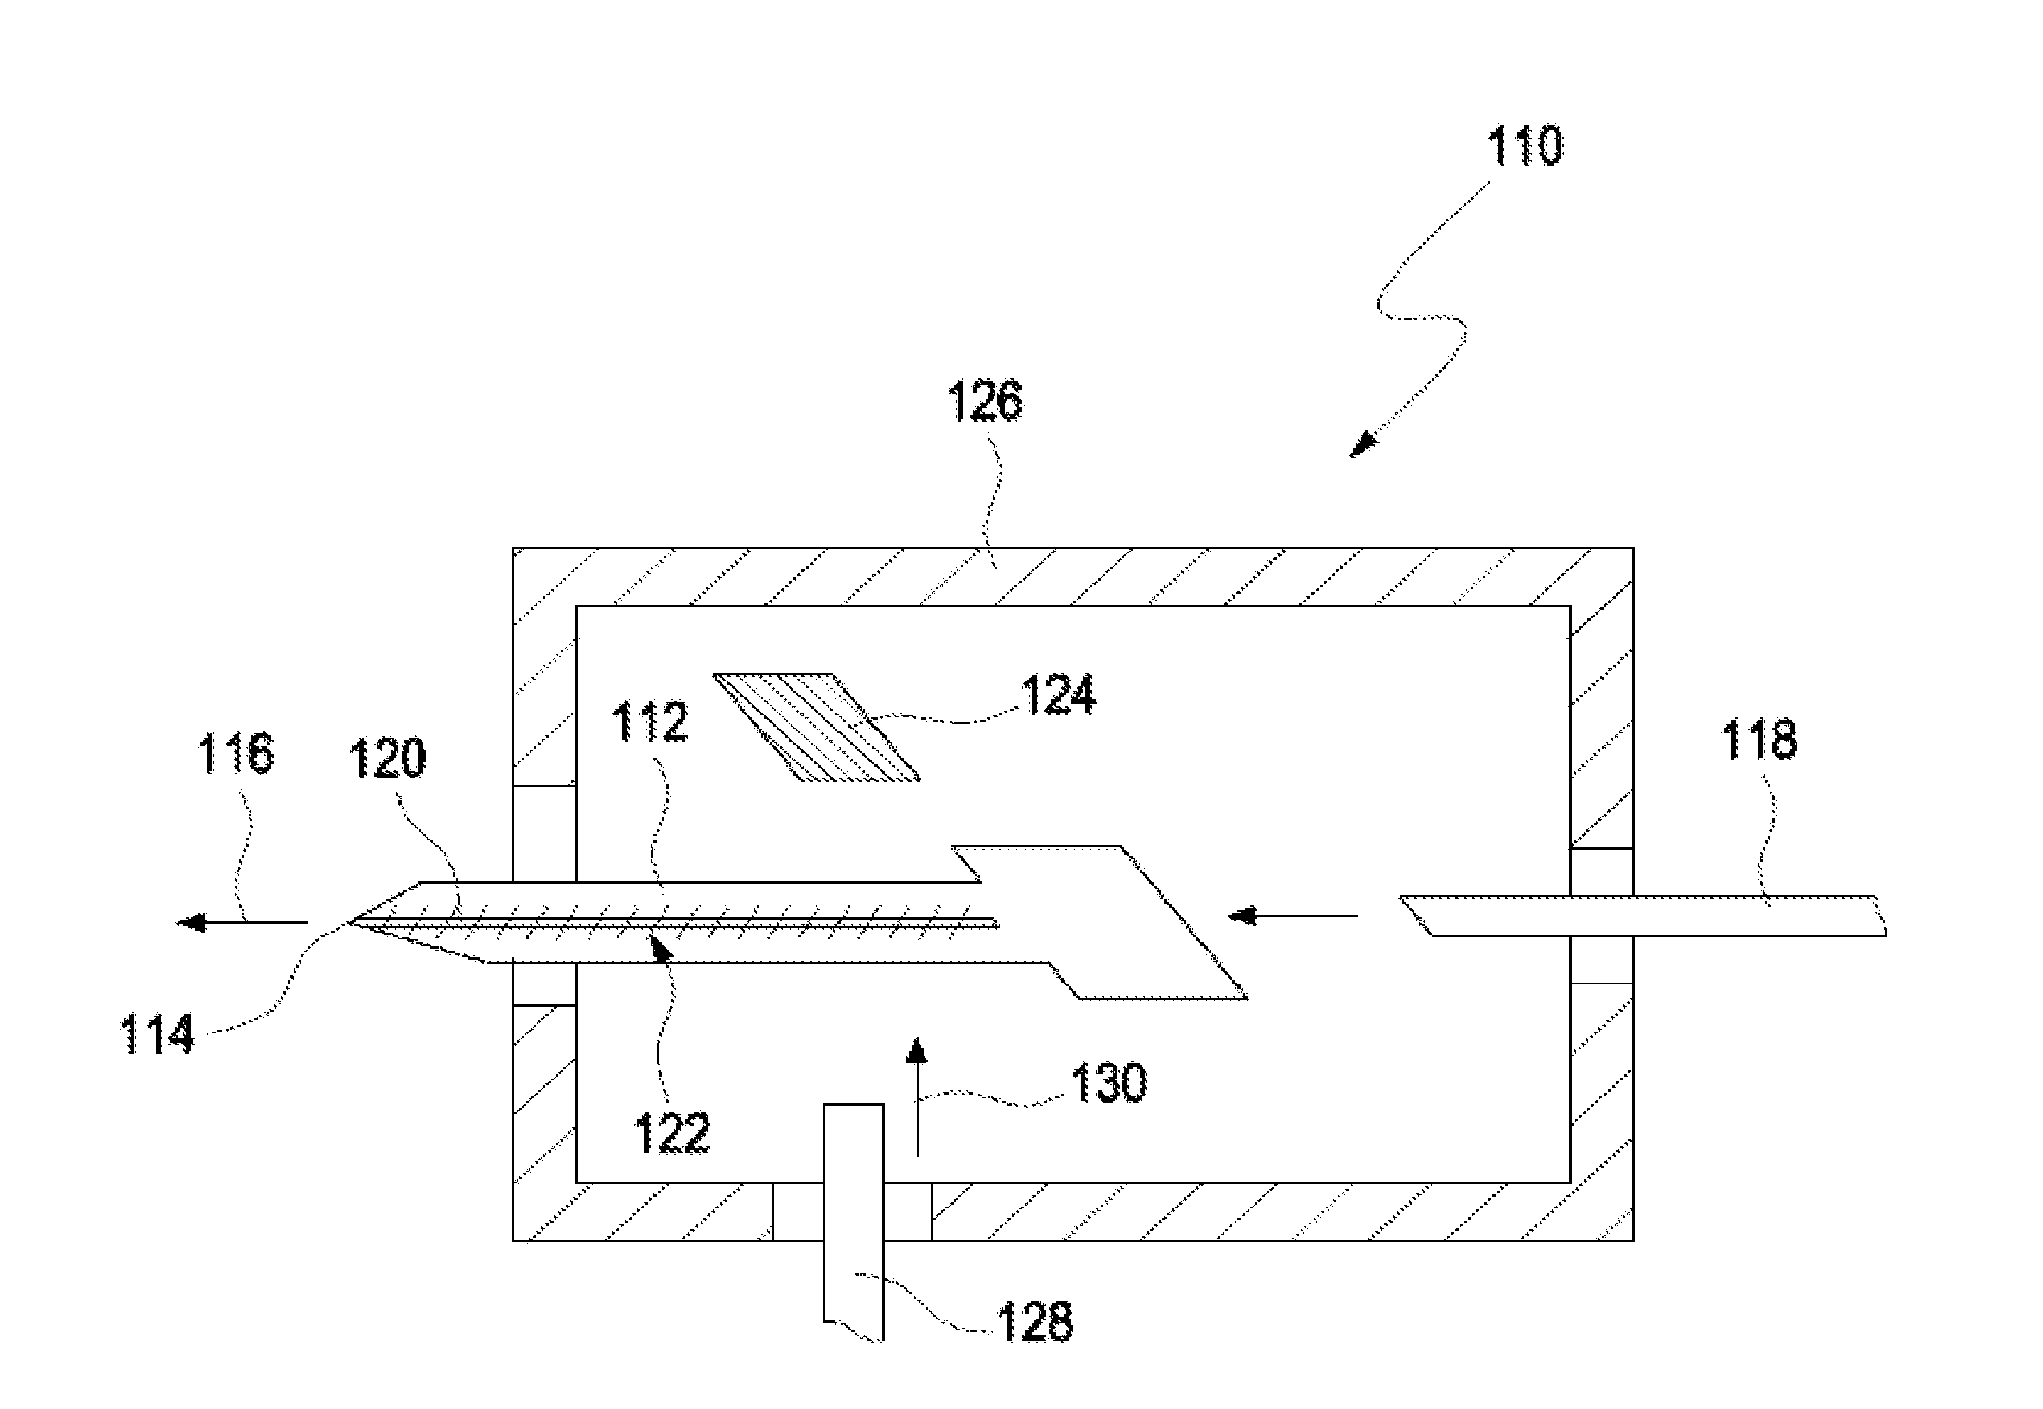 Analytical aids with hydrophilic coating containing nanoparticles with silica structure and methods of producing and using the same